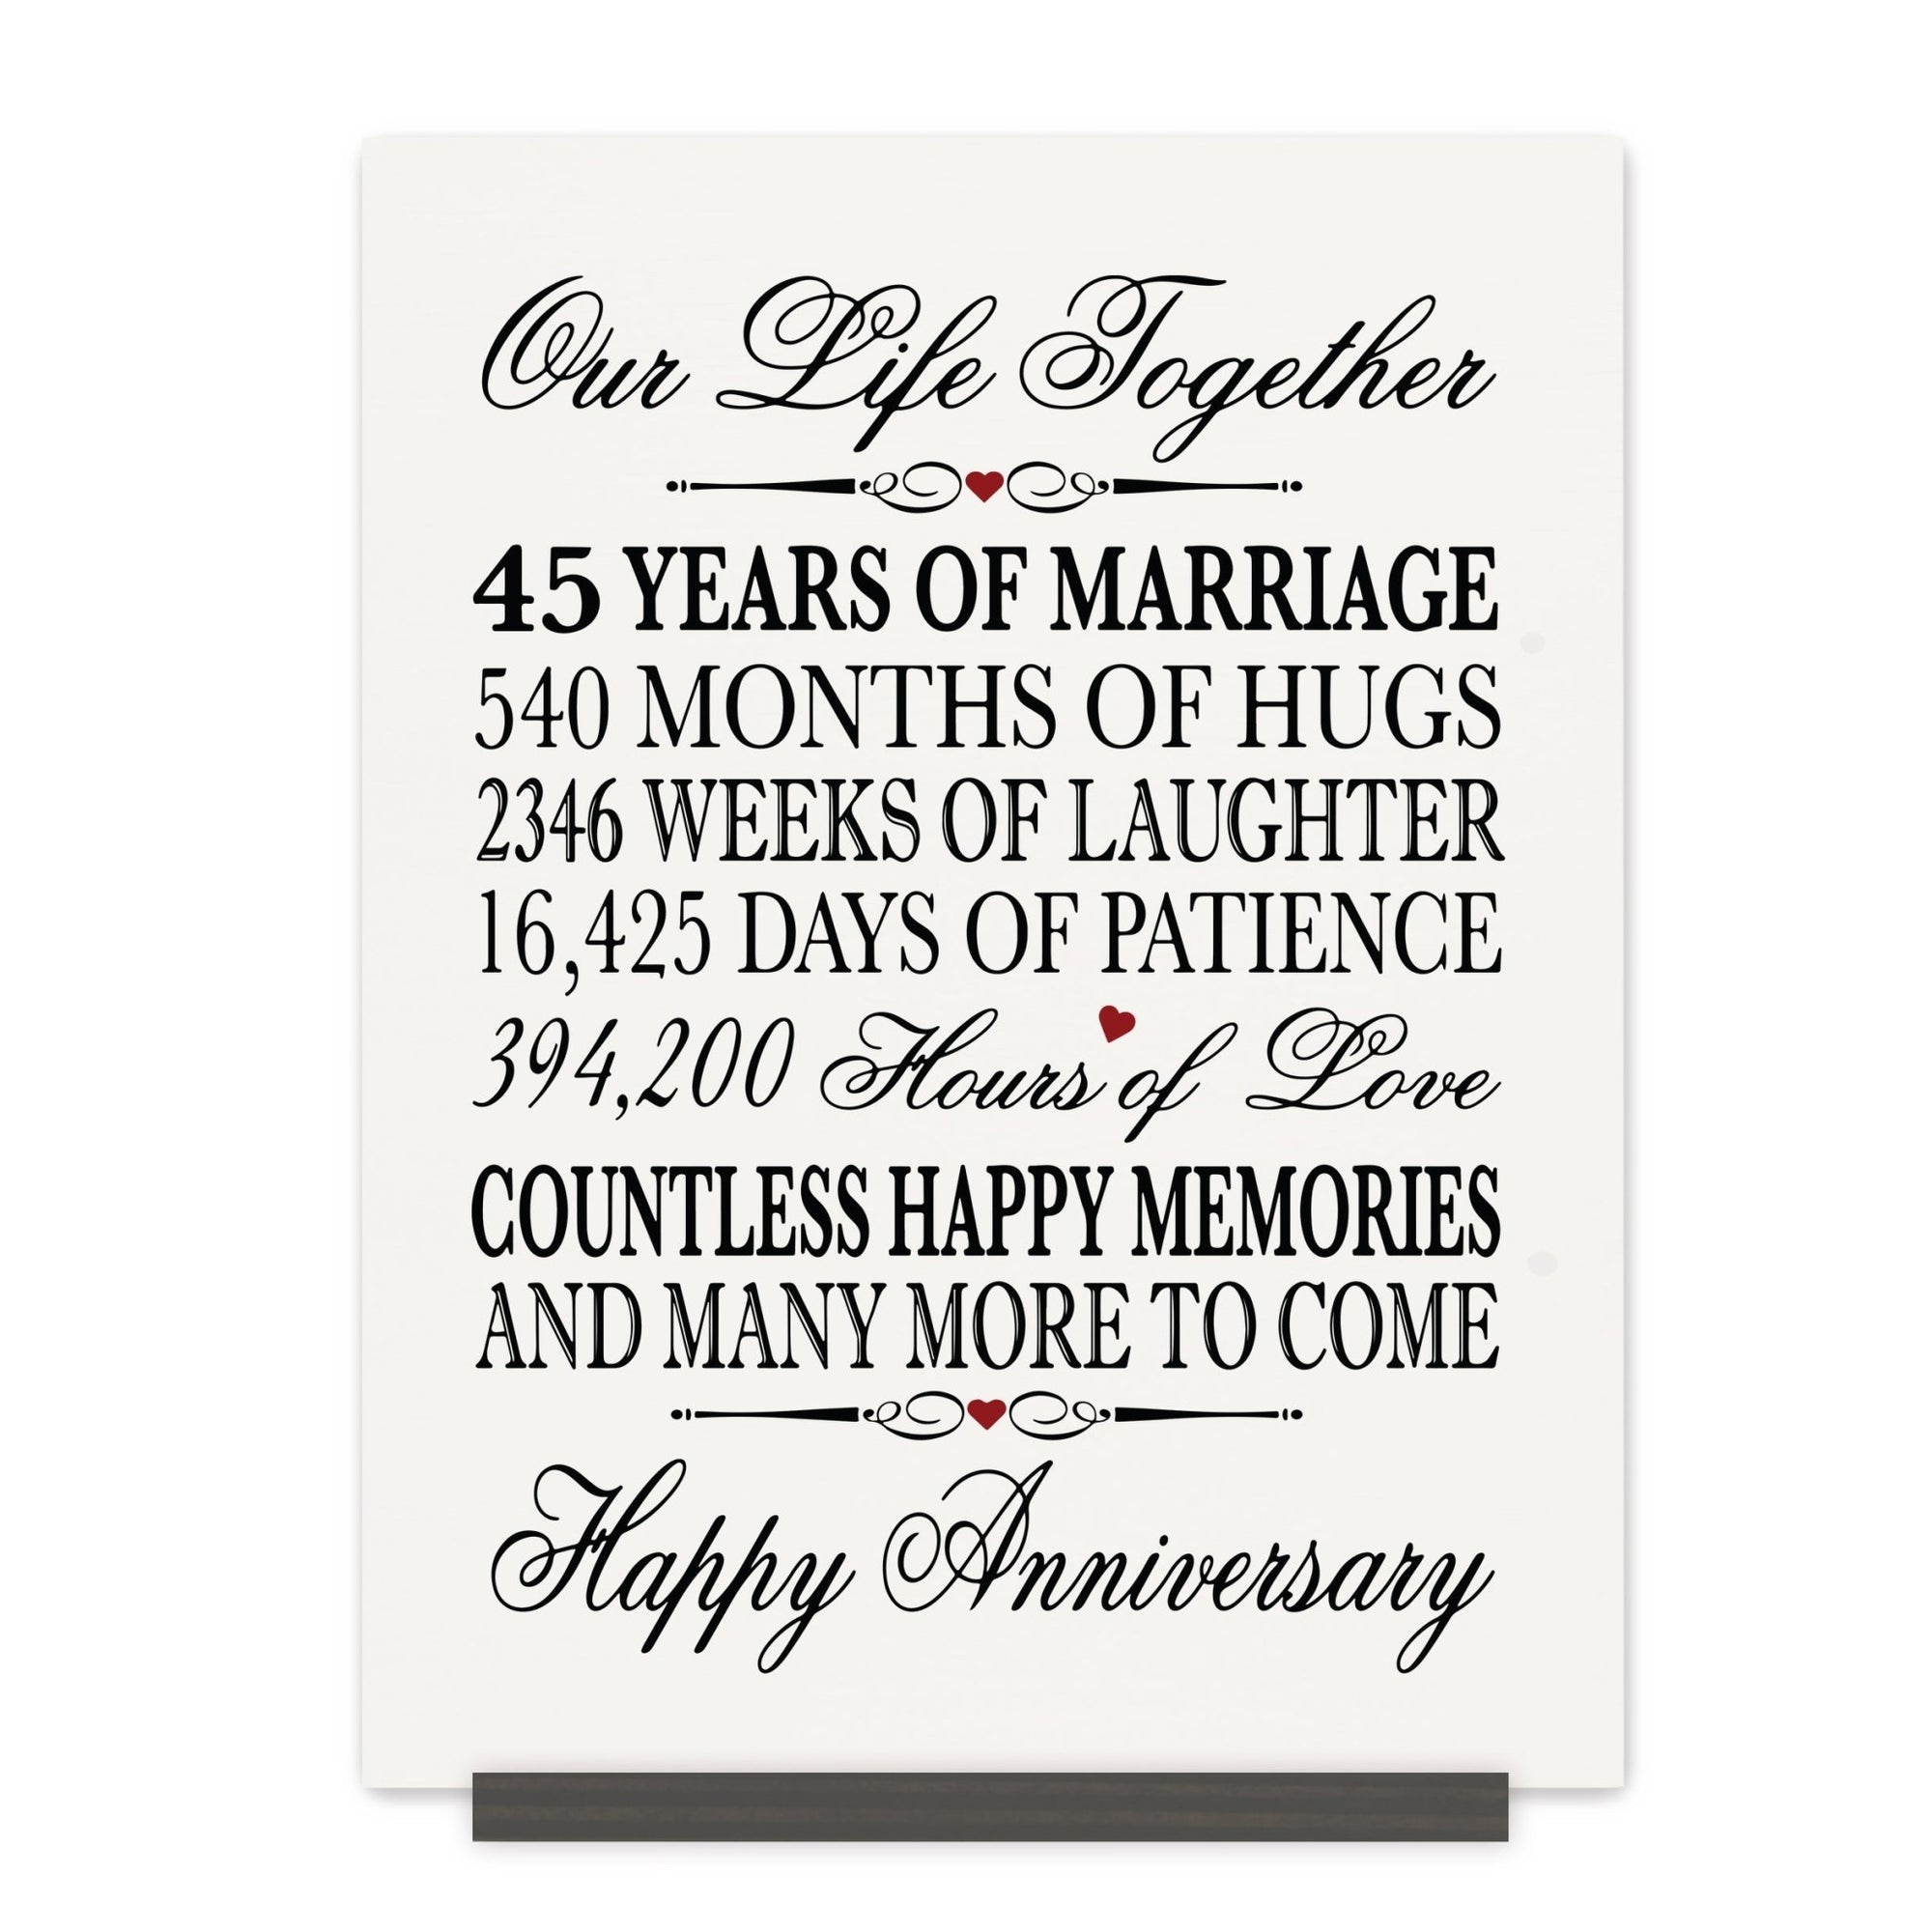 45th Wedding Anniversary Wall Plaque - Our Life Together - LifeSong Milestones